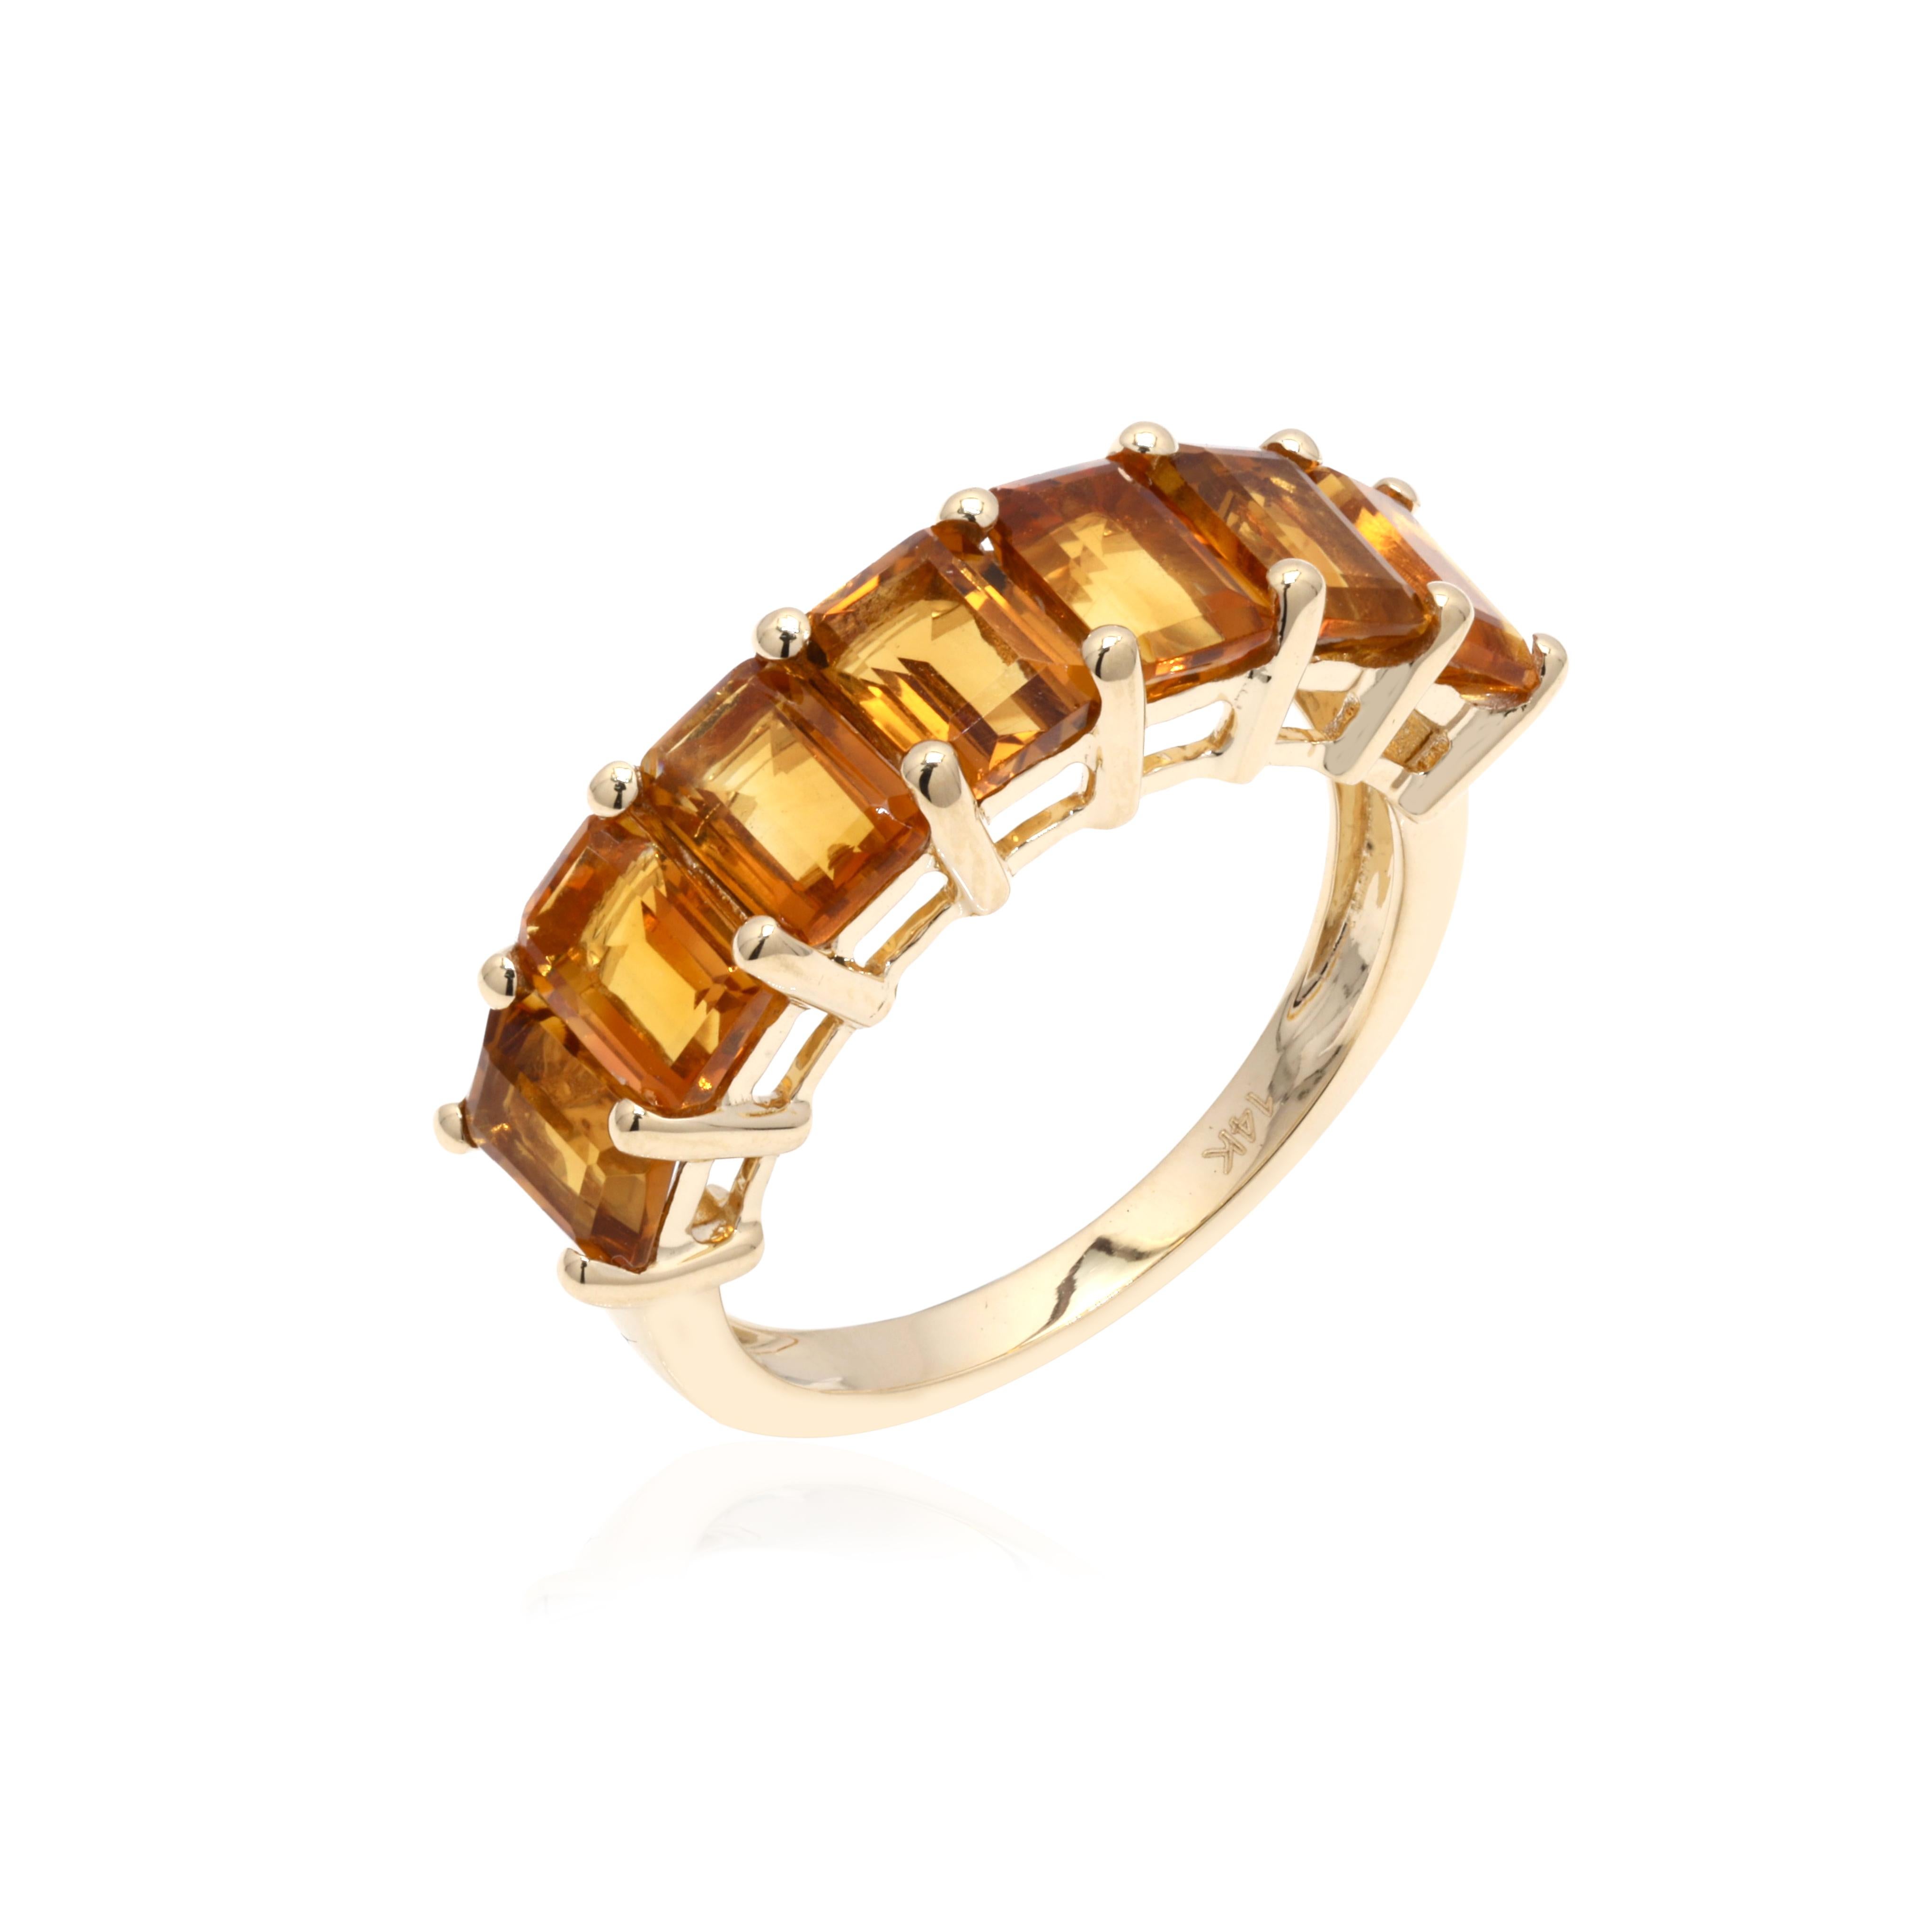 For Sale:  14K Solid Yellow Gold 3.83 Ct Citrine Gemstone Half Eternity Band Ring 6